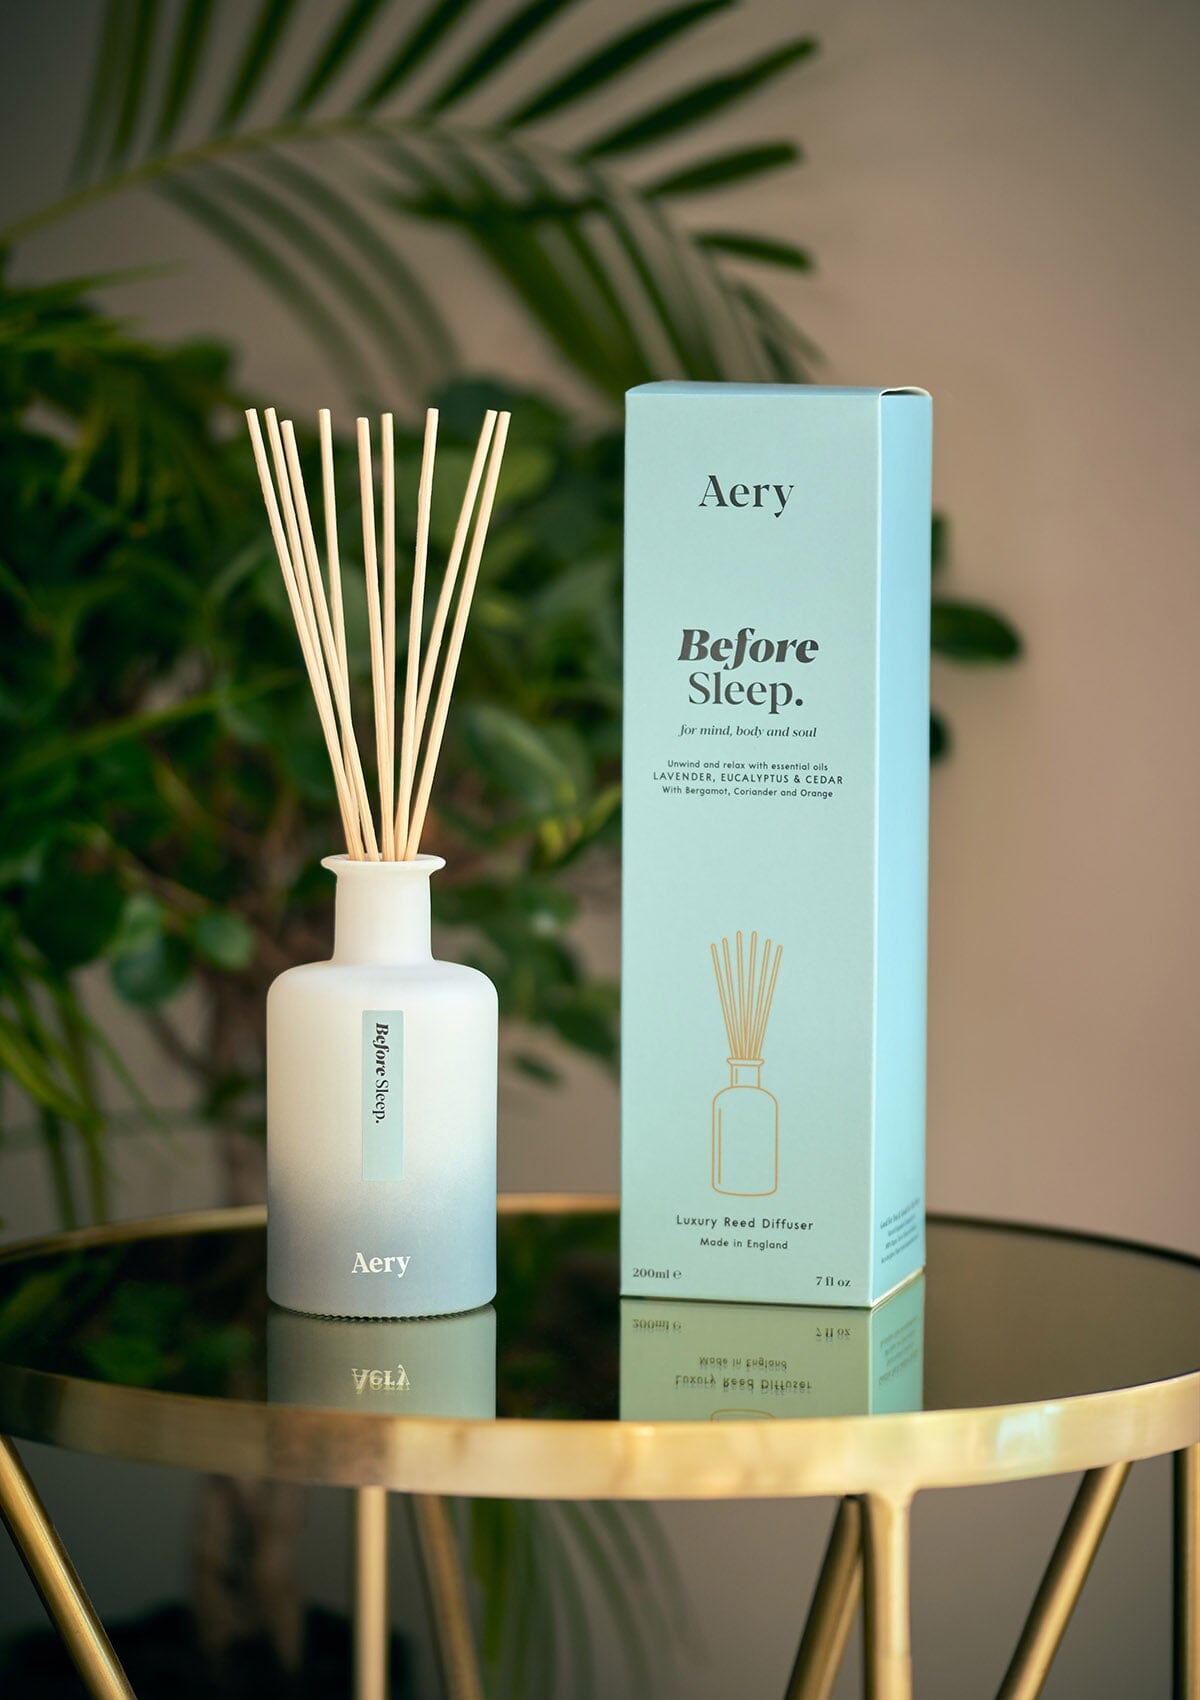 Blue Before Sleep diffuser by Aery displayed next to product packaging on round gold table with green plants 